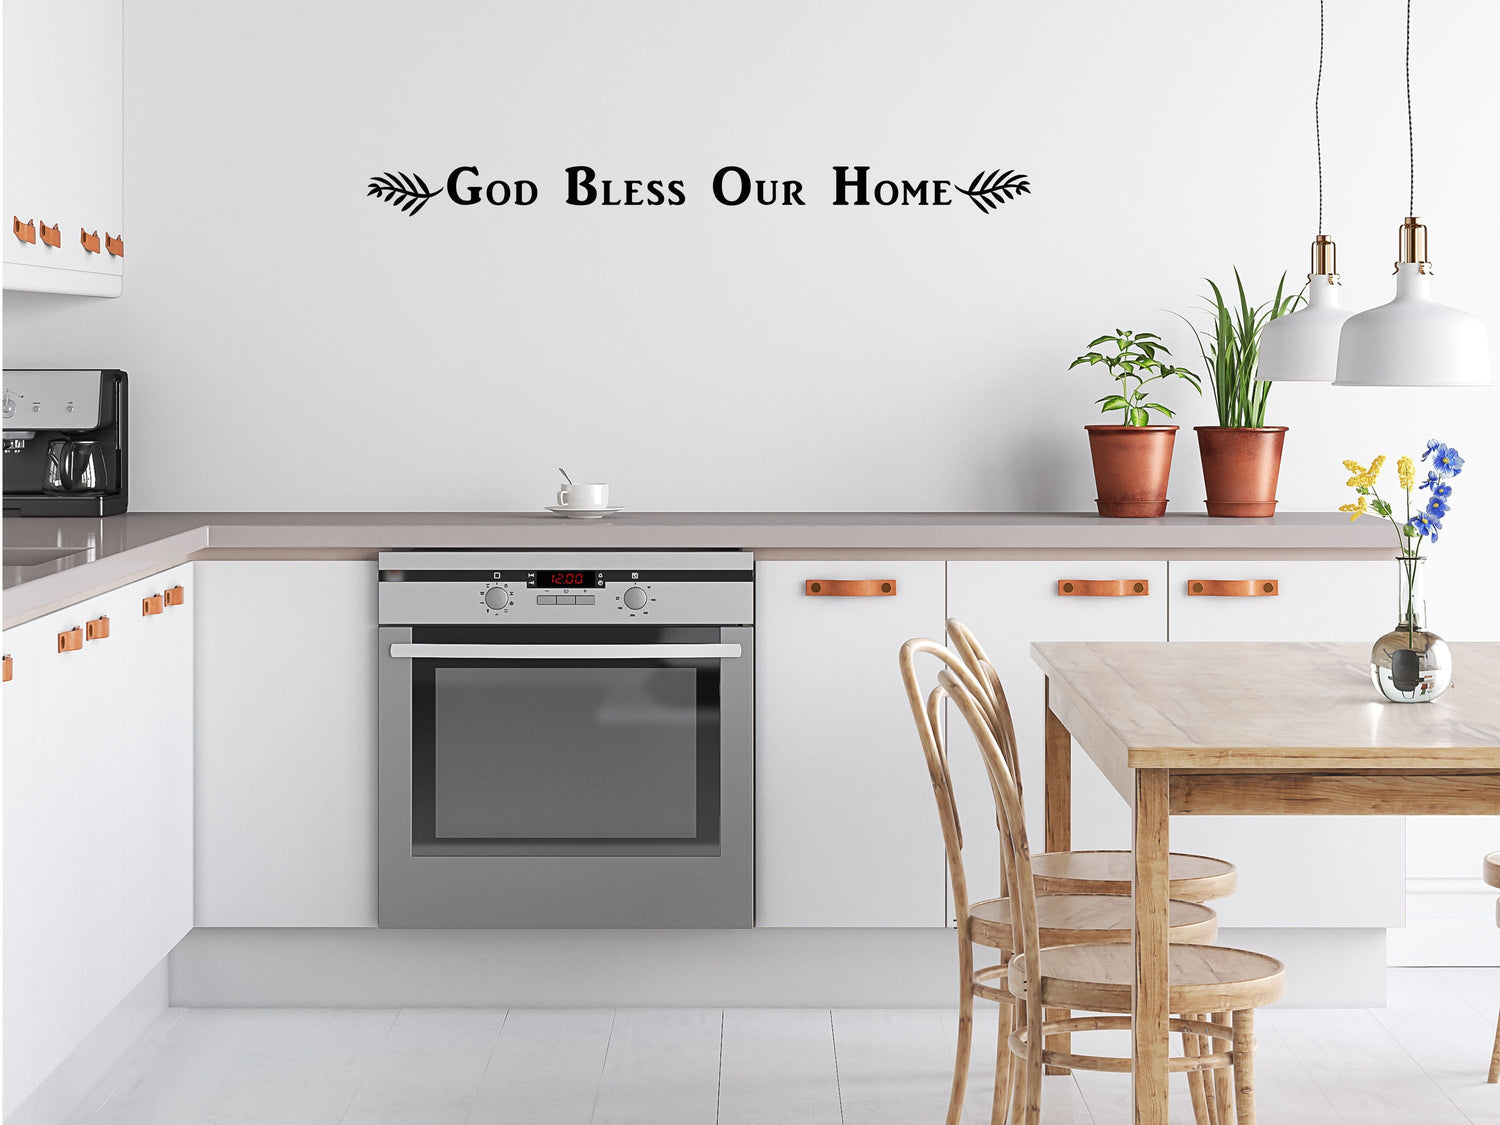 God Bless Our Home - Home Wall Decor- Inspirational Wall Decals Vinyl Wall Decal Inspirational Wall Signs 